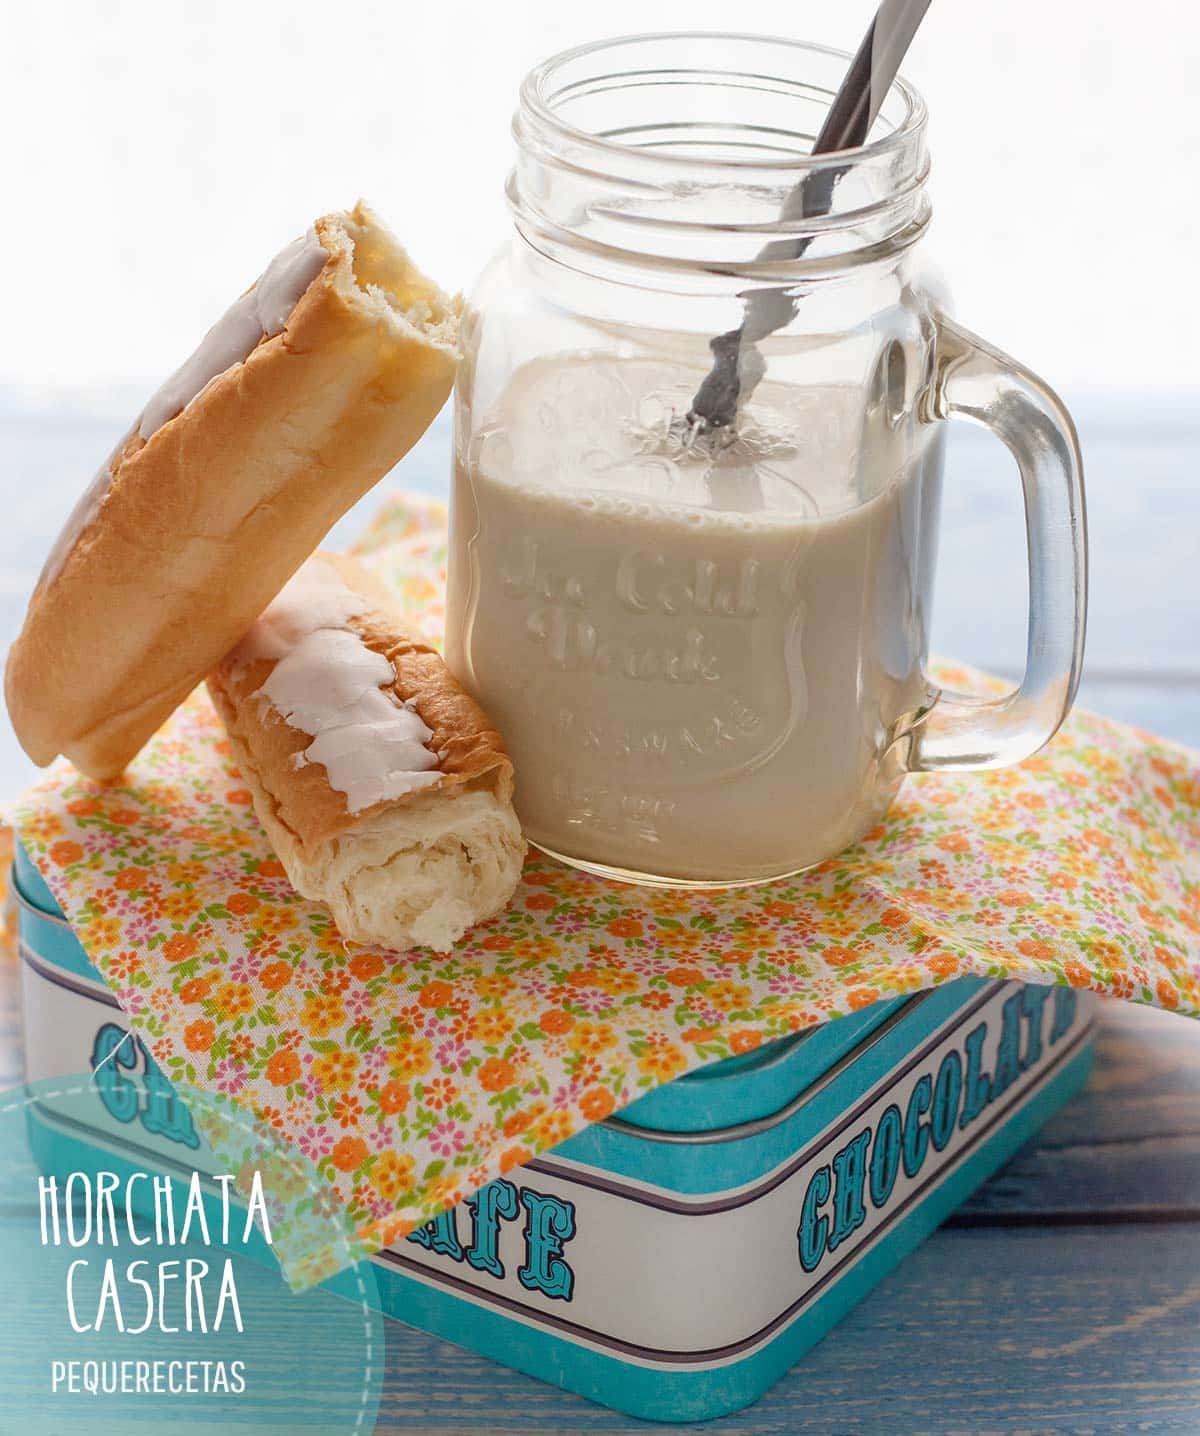 how to make homemade tiger nut horchata